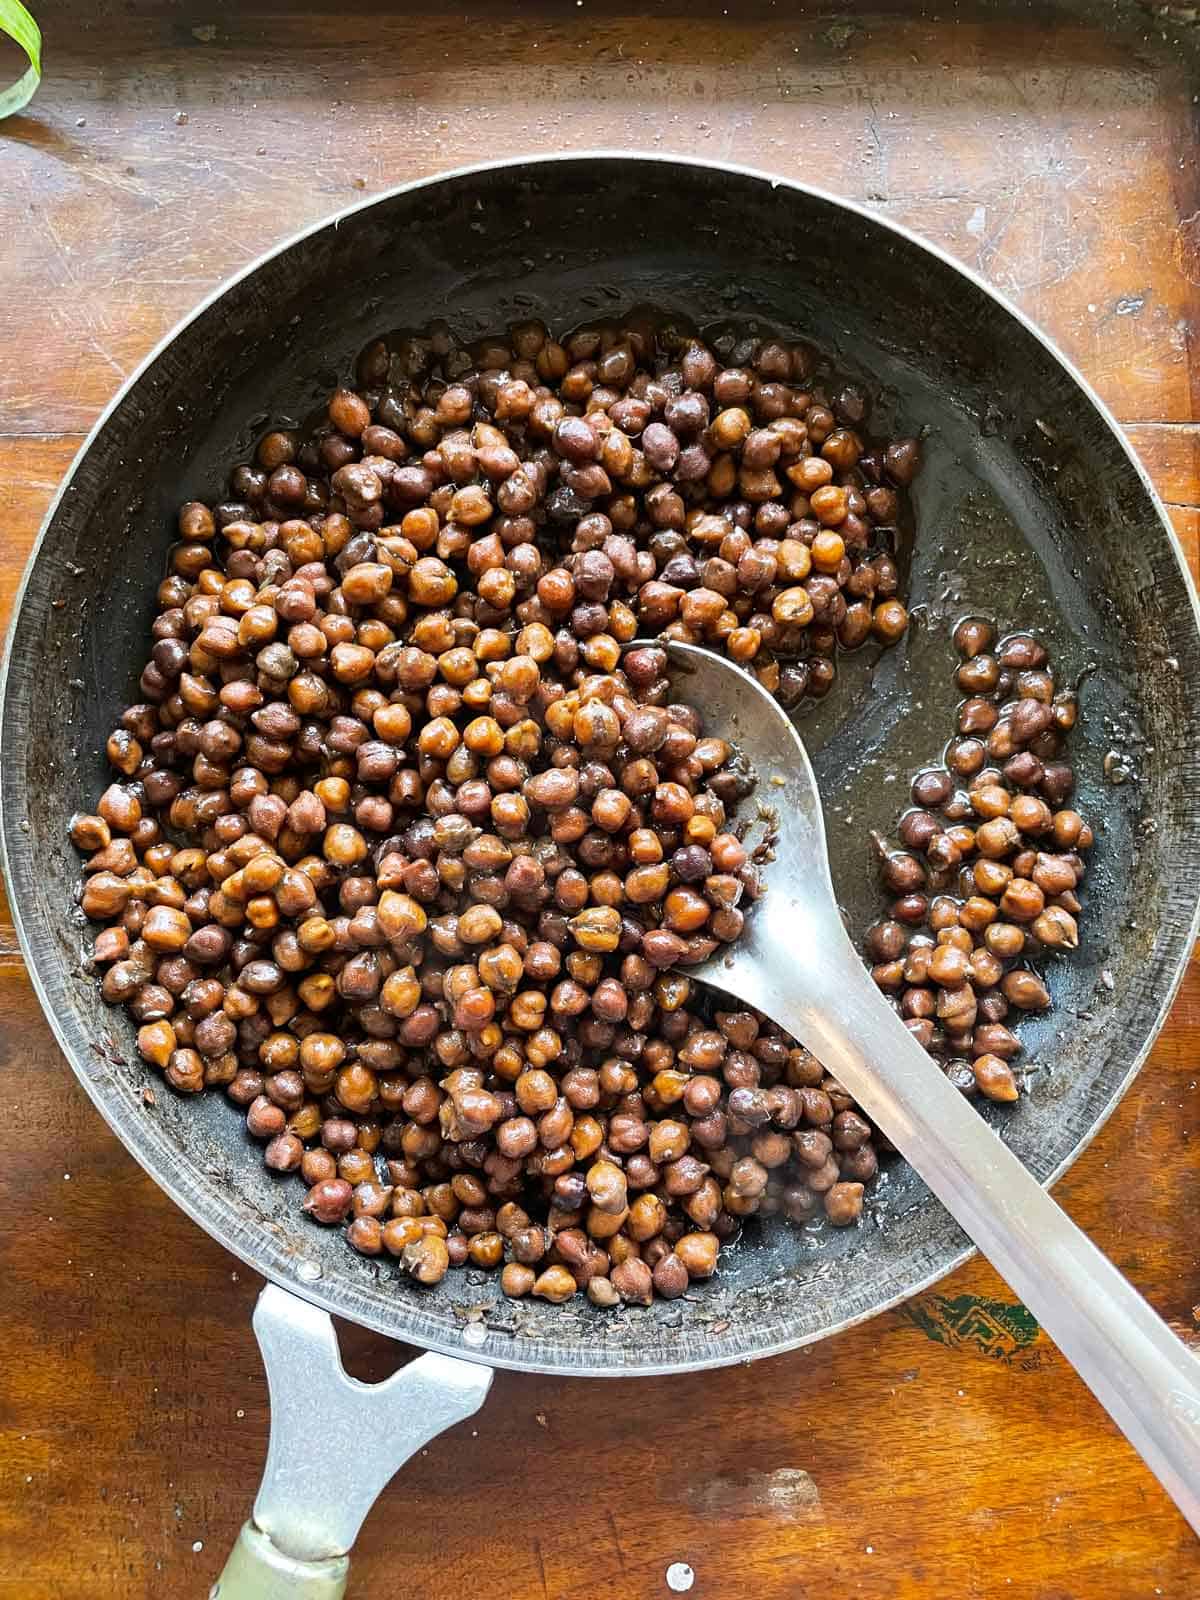 Kala chana pictures in the iron pan it was cooked in